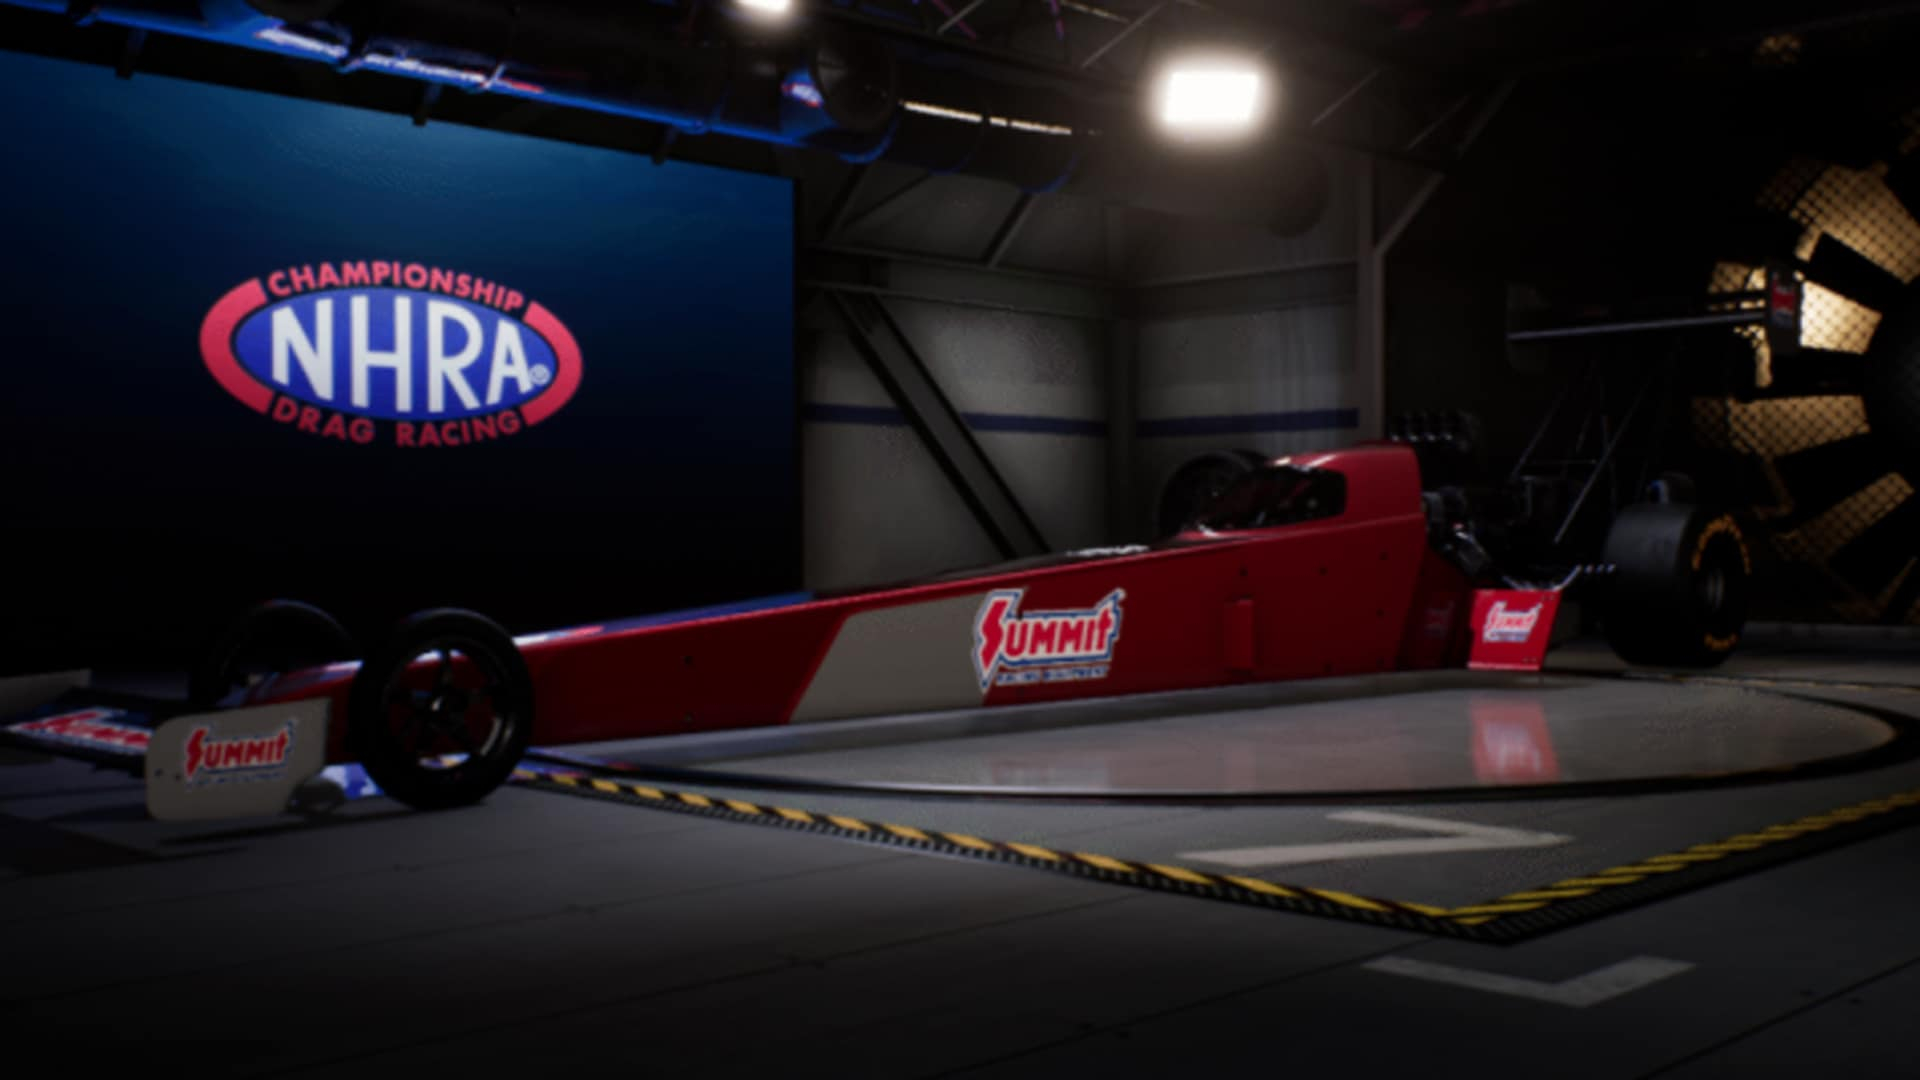 1920x1080 New drag racing NHRA game due later this year | Traxi